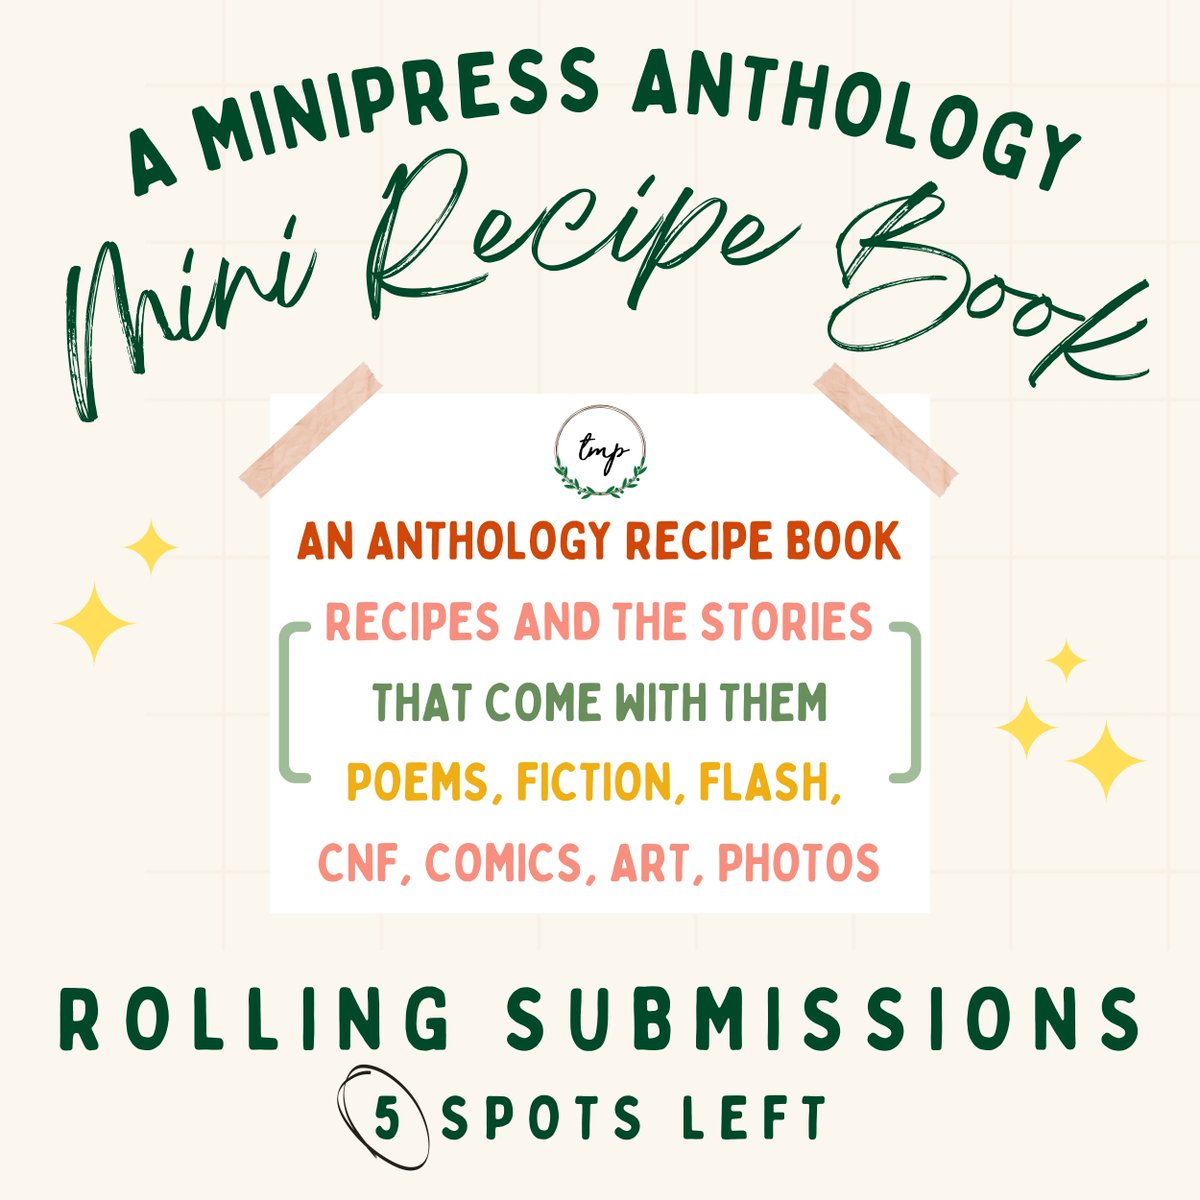 5 SPOTS LEFT. We're nearing our acceptance threshold! Our EIC had great chats with our photographer and chef liaison, and y'all? This anthology is going to look SO INCREDIBLE.

Get your recipes and stories in ASAP! theminisonproject.com/minipress

#MiniPress #RecipeAnthology #FoodWriting